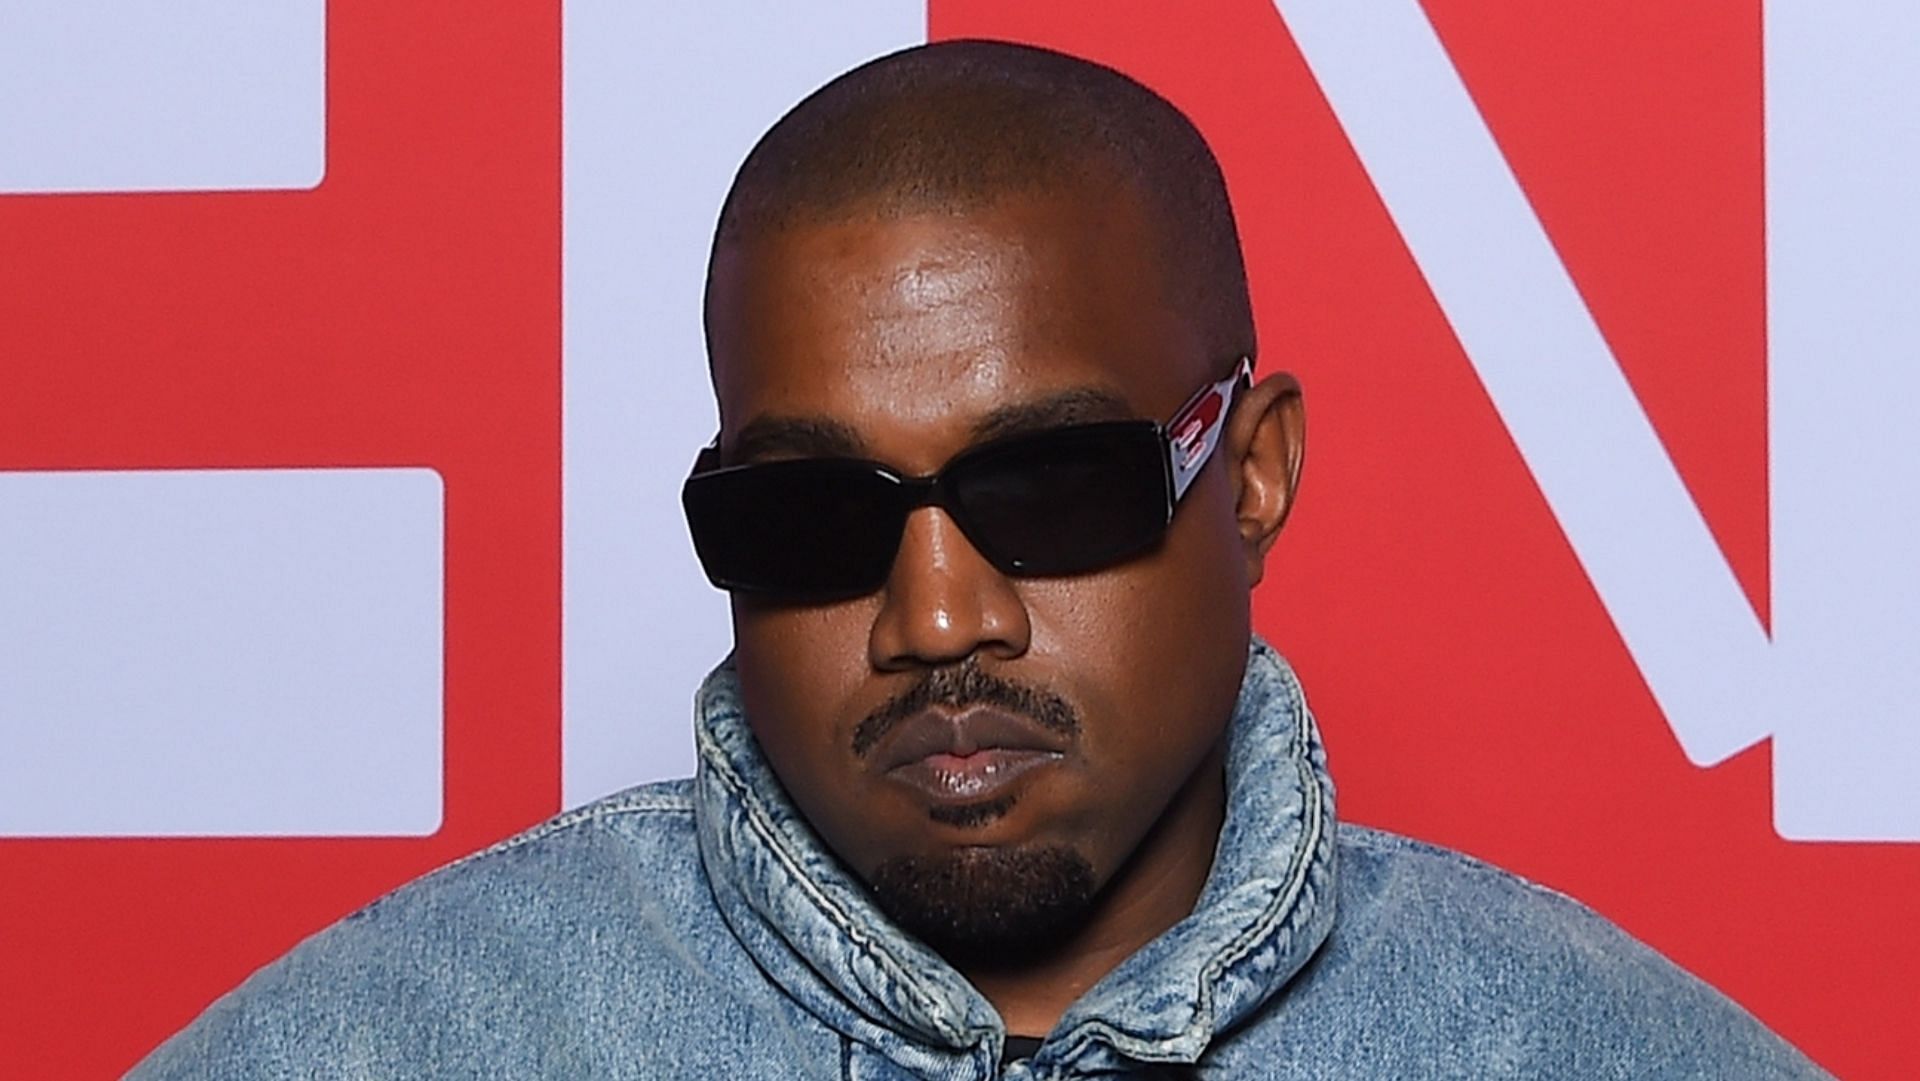 Kanye West has had a history of wearing controversial outfits. (Image via Stephane Cardinale - Corbis/Getty)